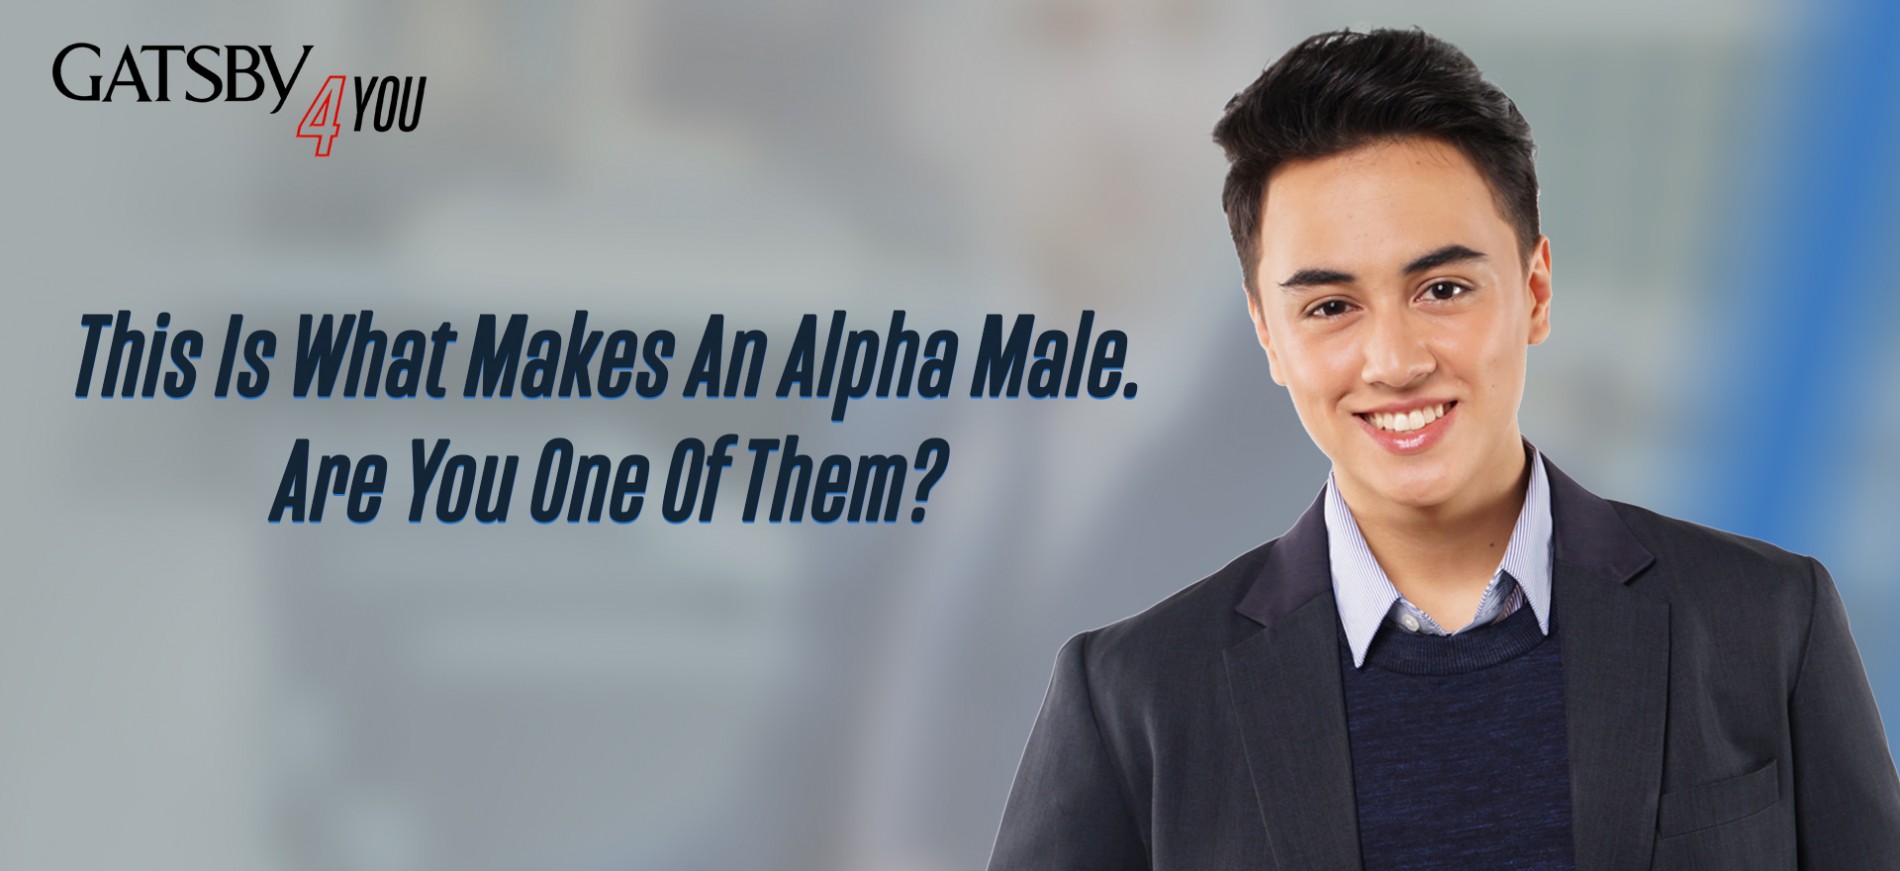 GATSBYP hilippines What makes an alpha male?